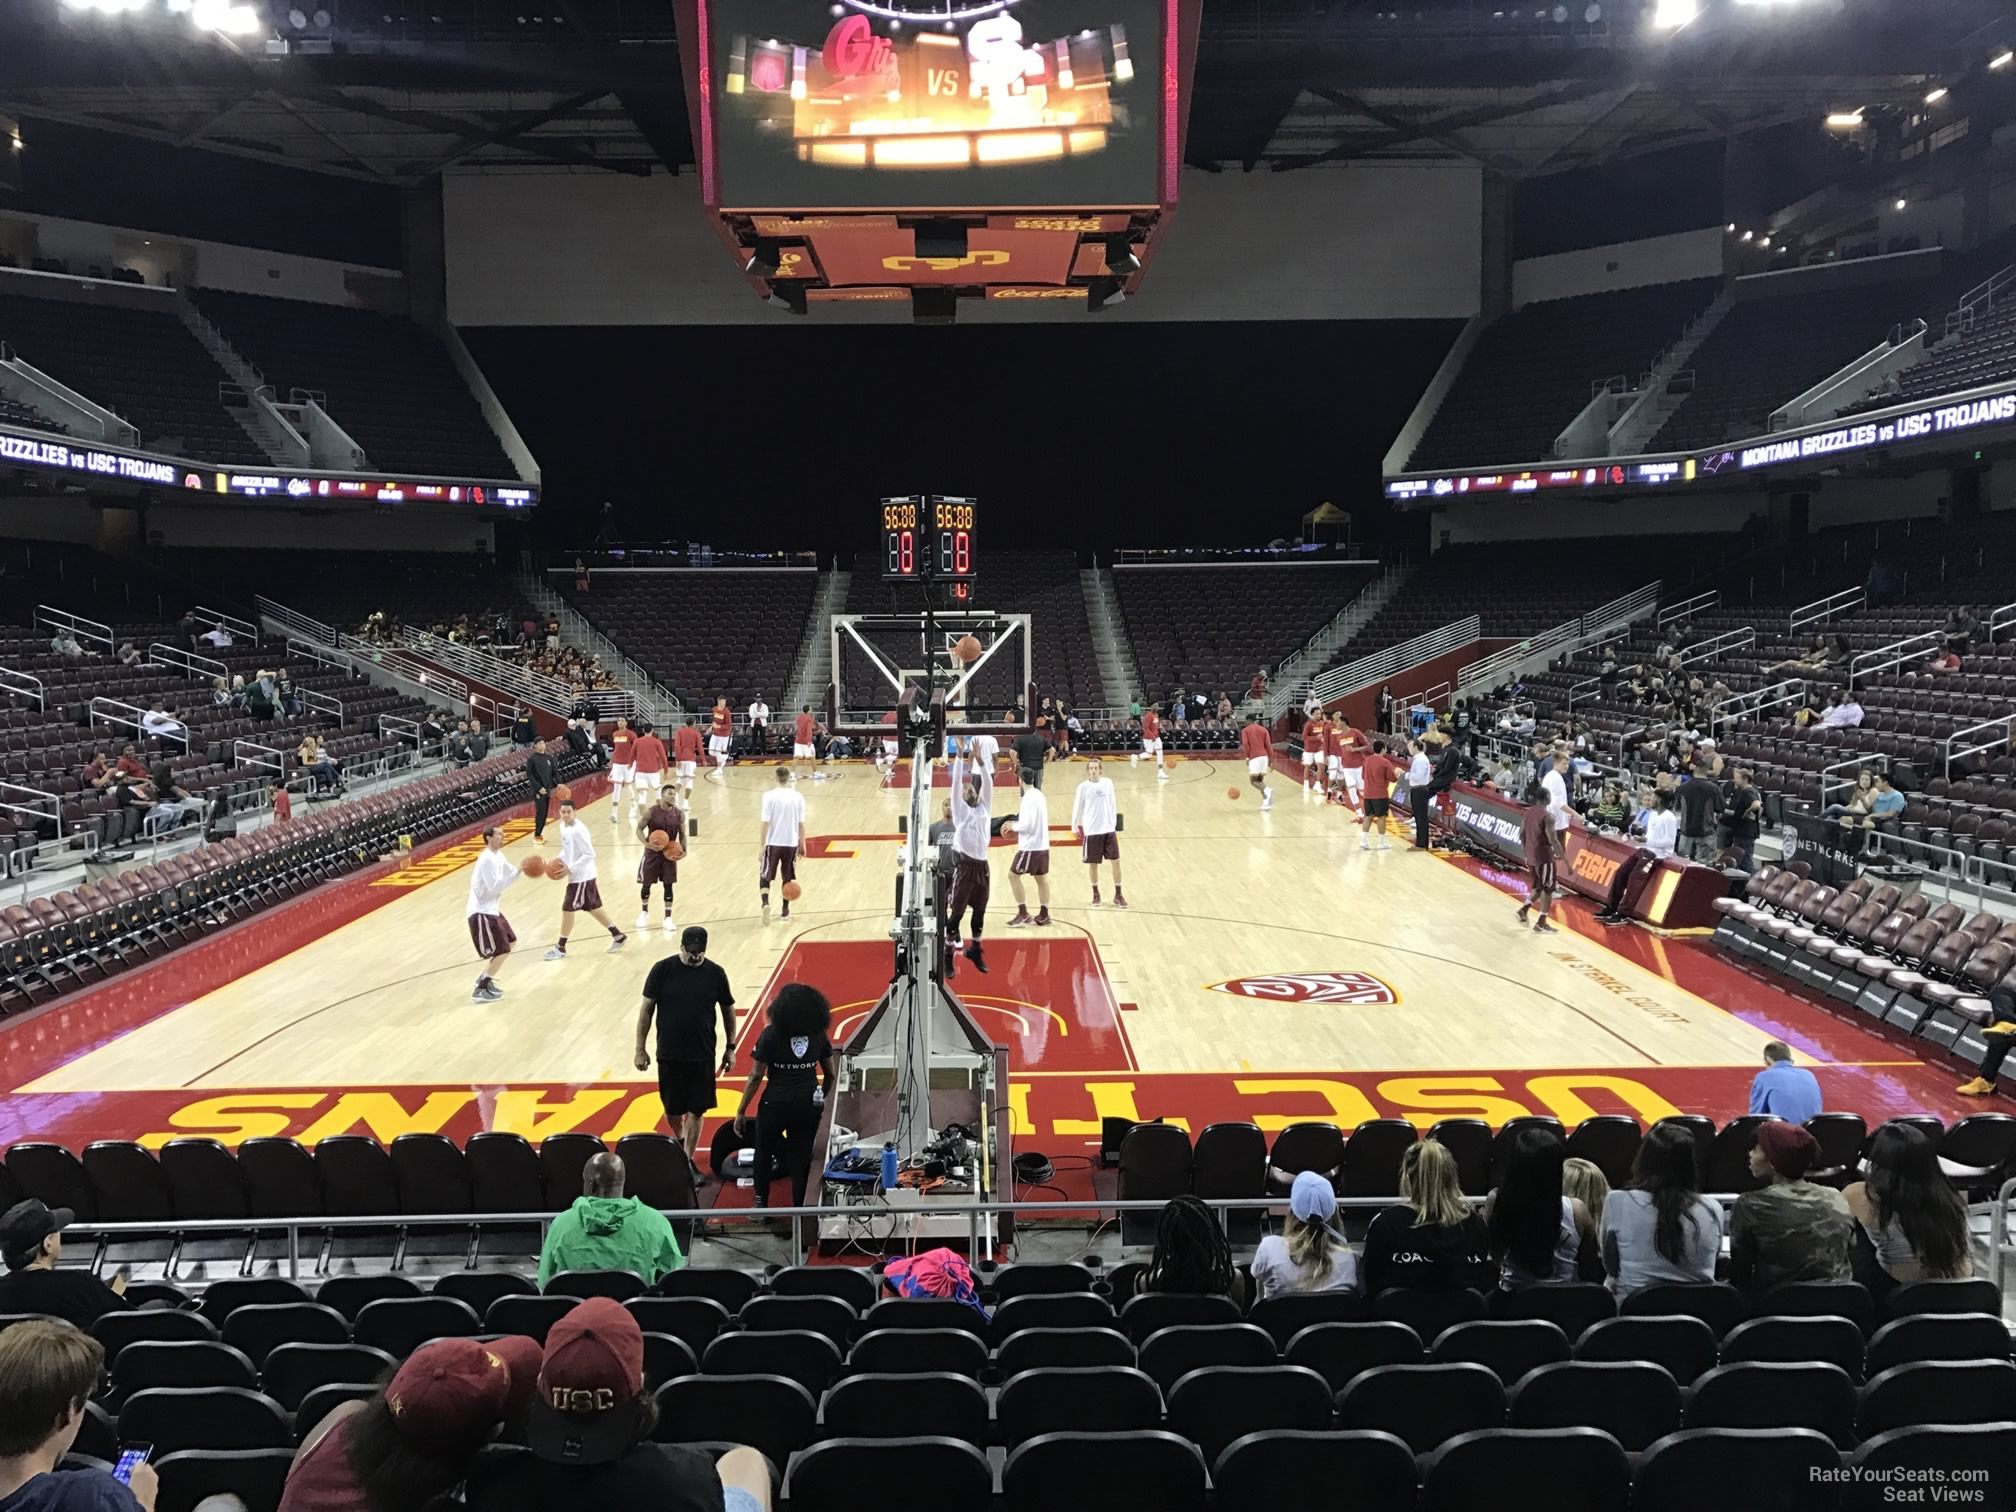 section 110, row 10 seat view  - galen center